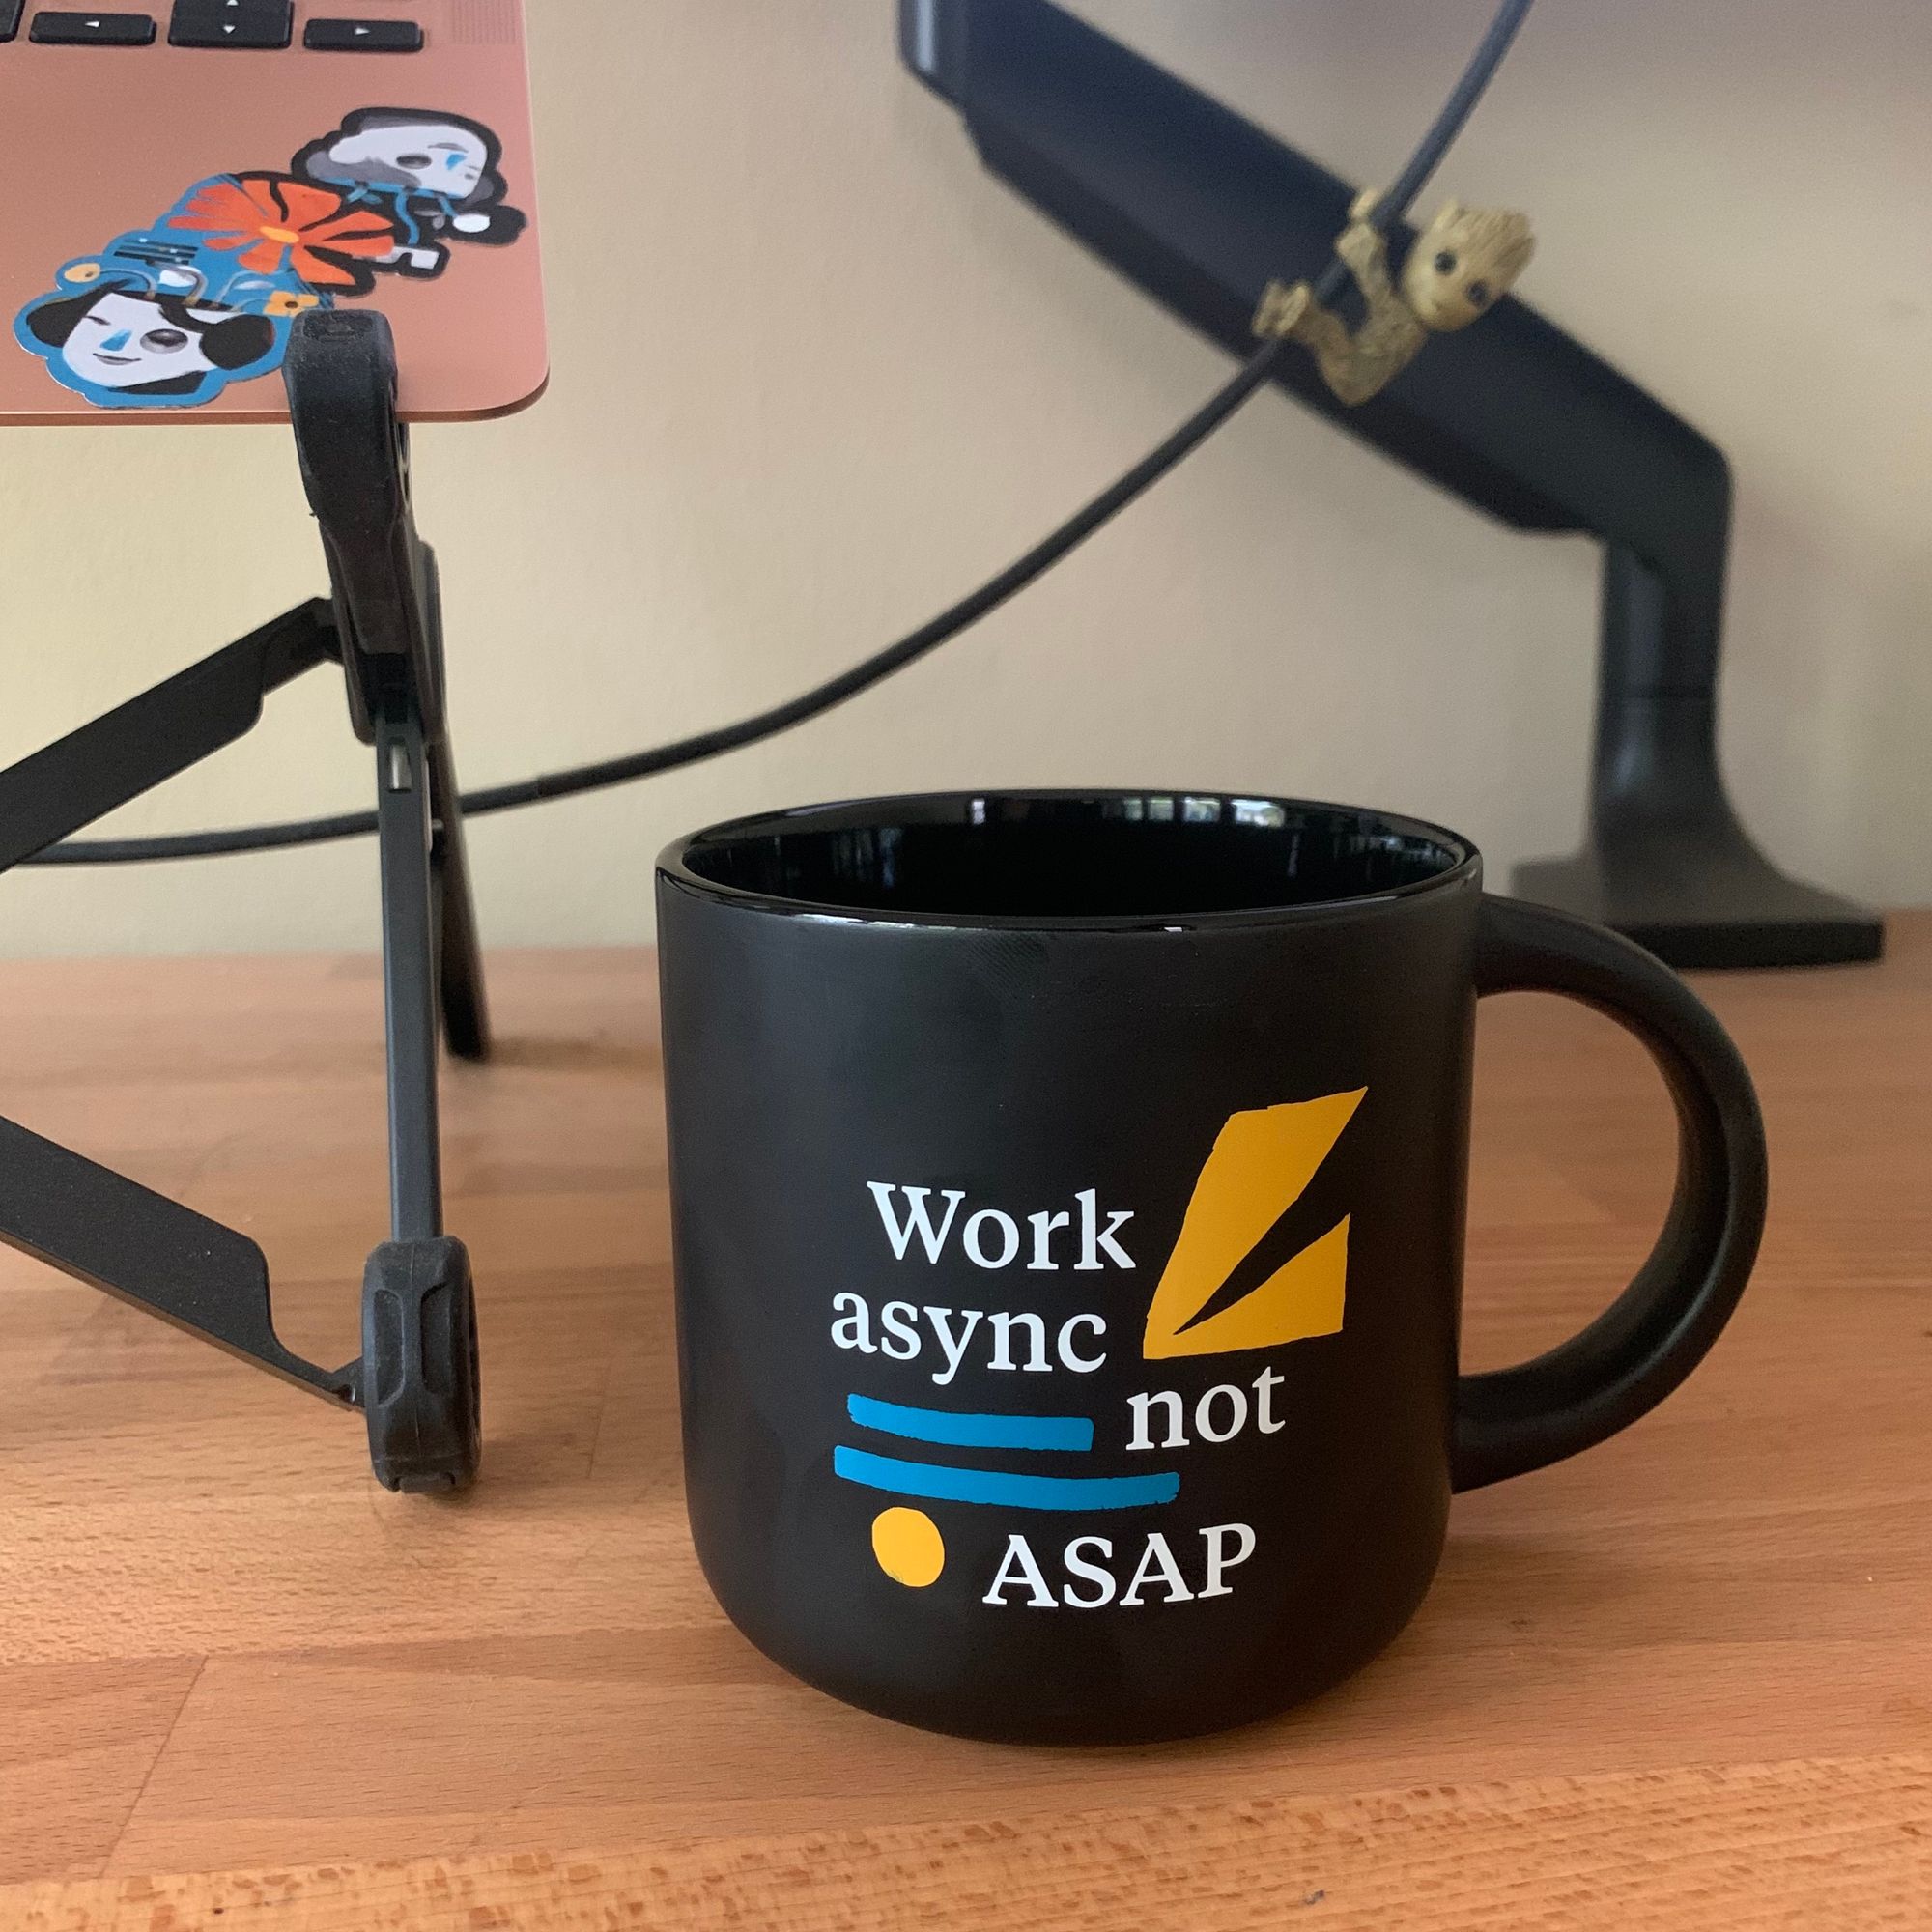 A matte black mug with "Work async not ASAP" in white lettering.